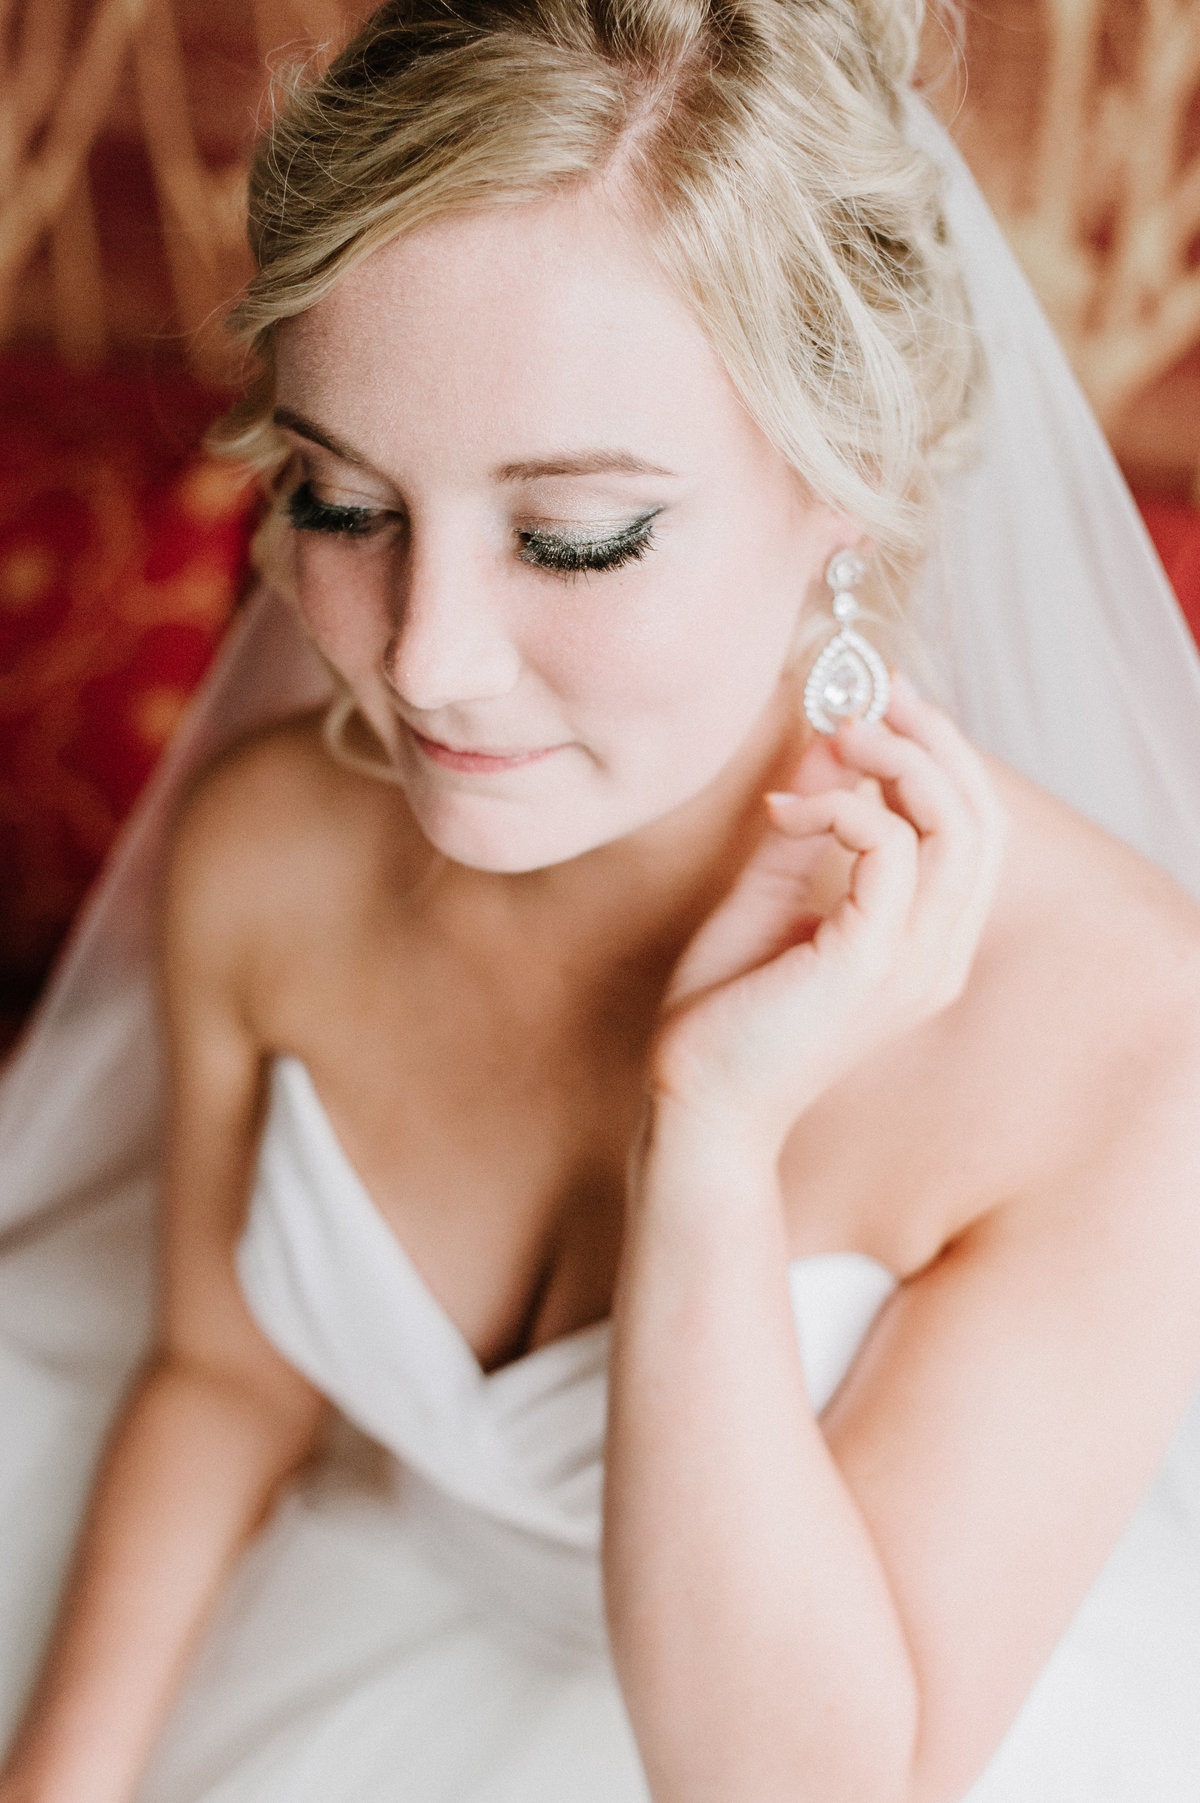 bride wearing strapless dress sitting on couch touching earring